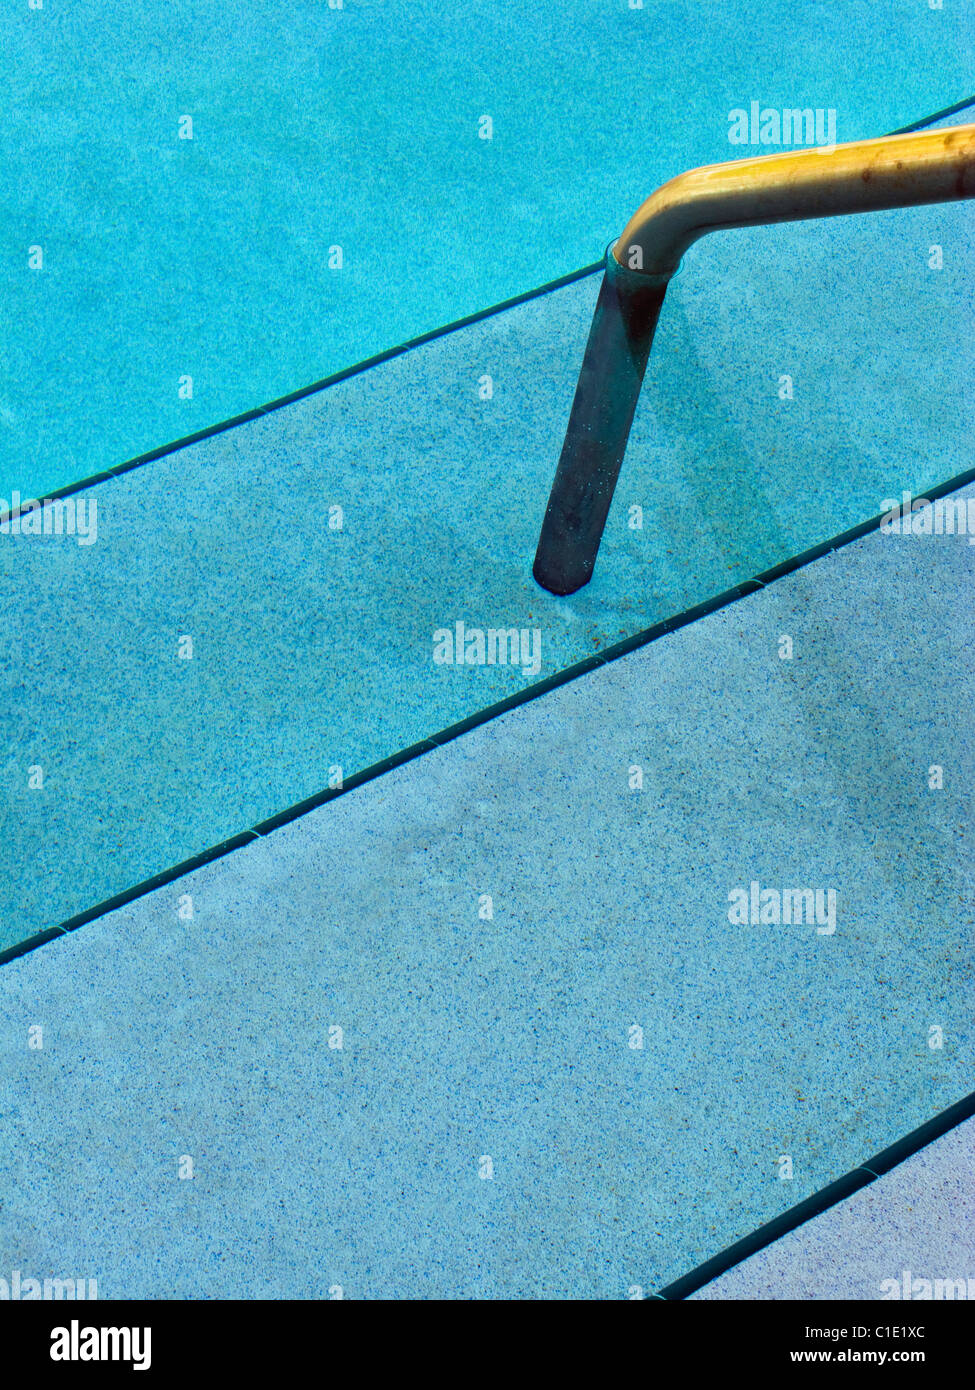 SWIMMING POOL HANDRAIL AND STEPS/ ABSTRACT DETAIL Stock Photo